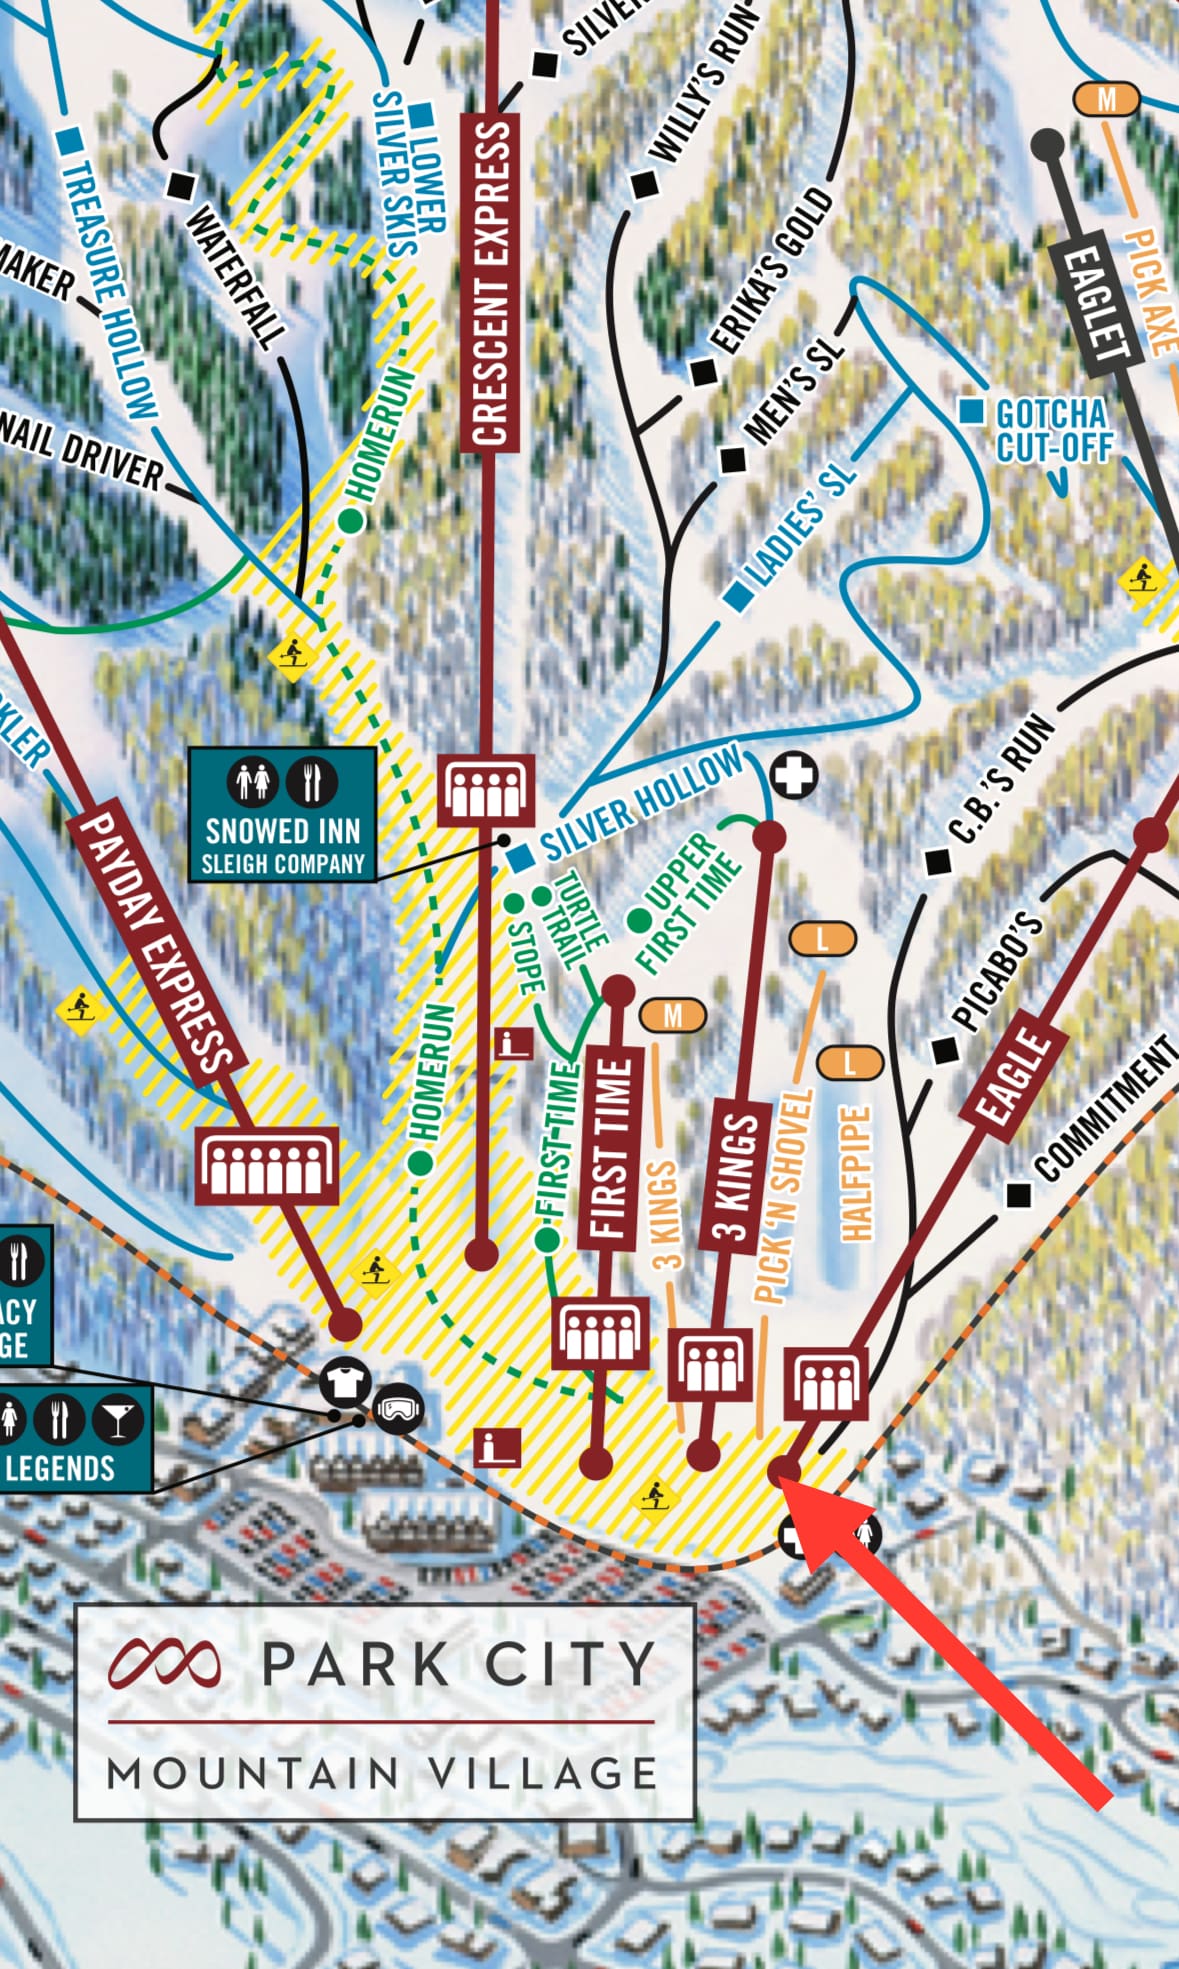 Arrow points to the Eagle Super Pond at Park City Mountain, where the 3rd annual pond skim will take place.